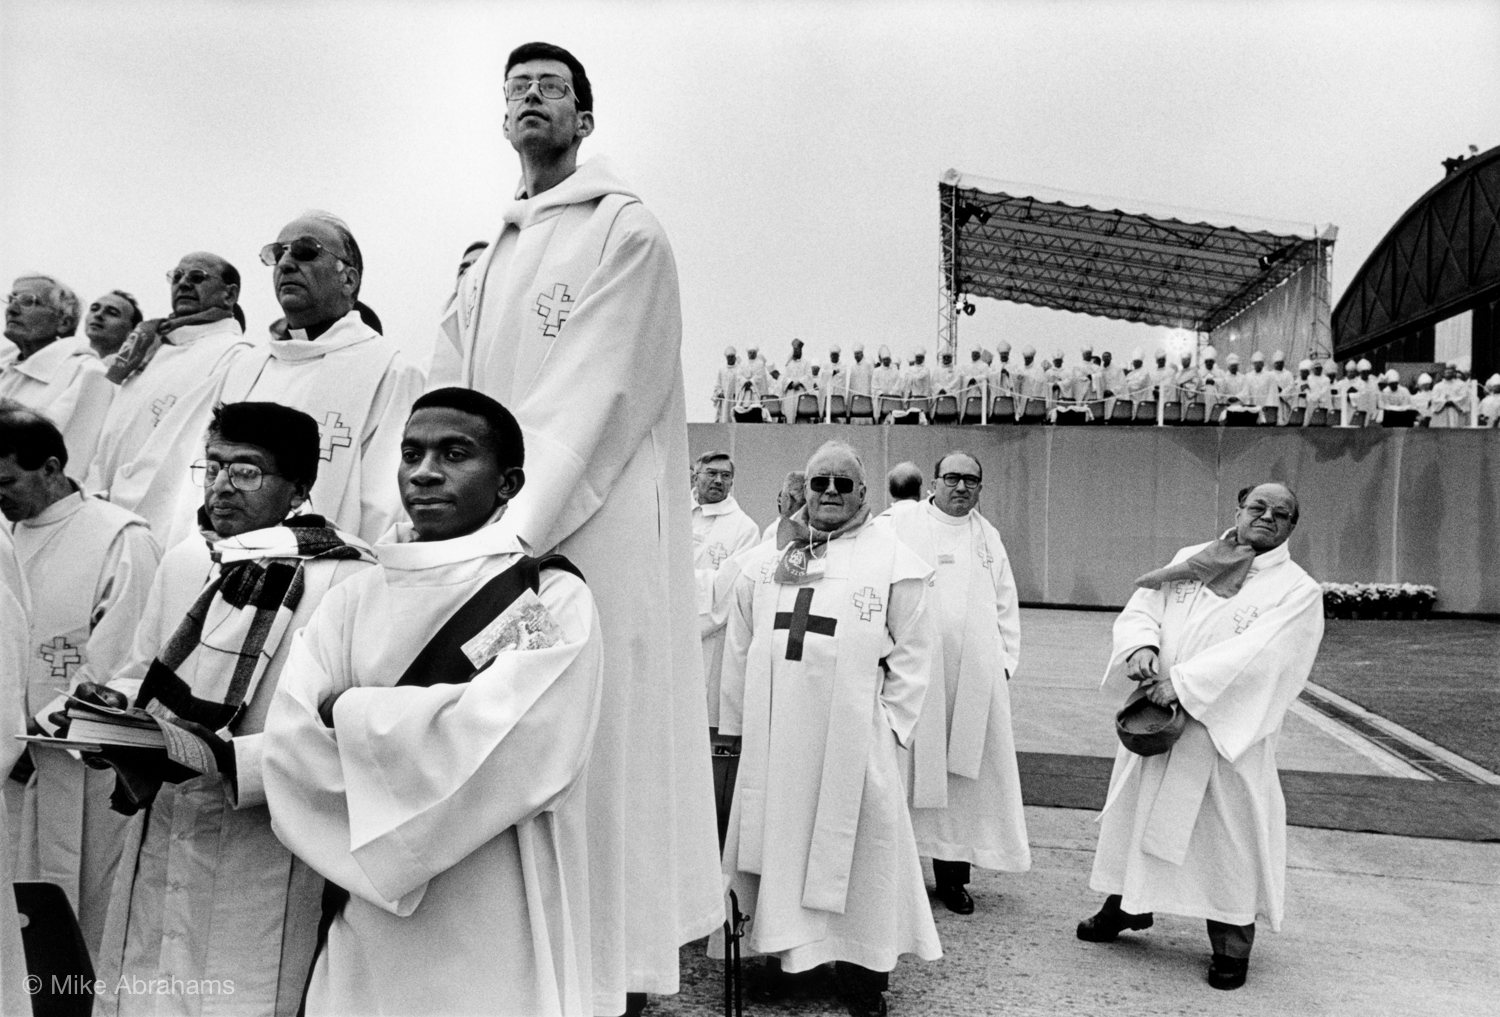  Catholic priests awaiting the arrival of the Pope. 200,000 people attend an open air mass at Reims. France 1996 